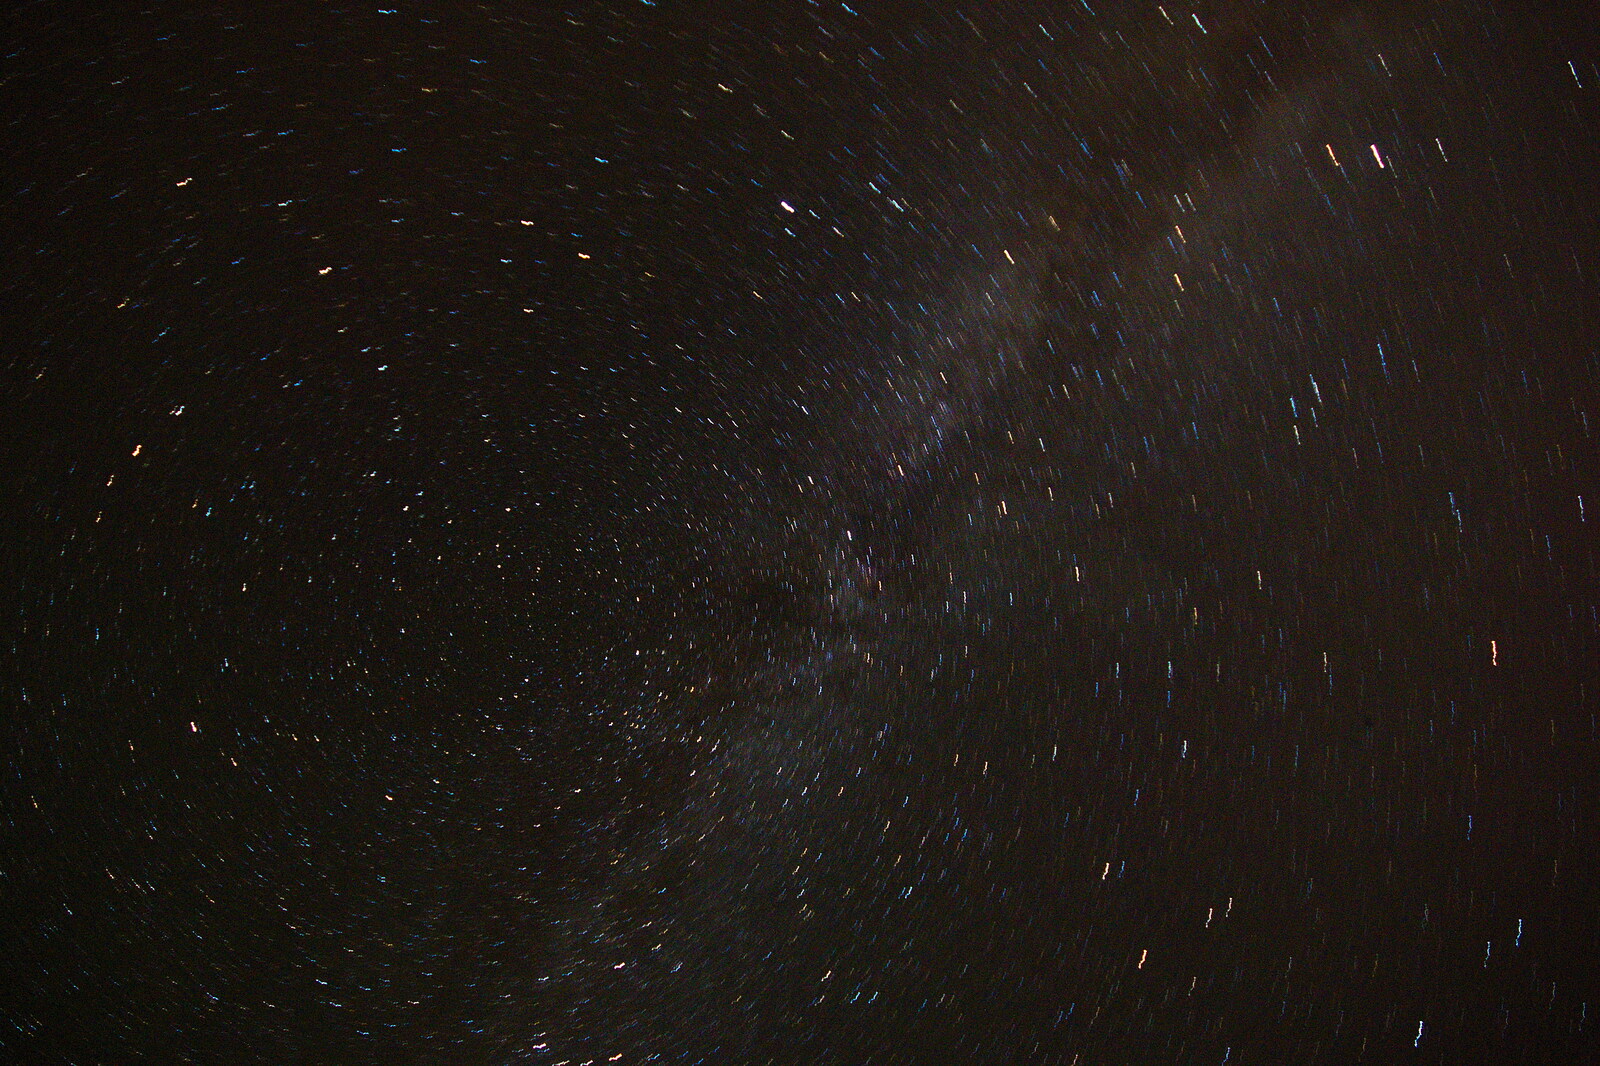 A 30-second exposure shows the Milky Way from Waxham Sands and the Nelson Head Beer Festival, Horsey, Norfolk - 31st August 2019